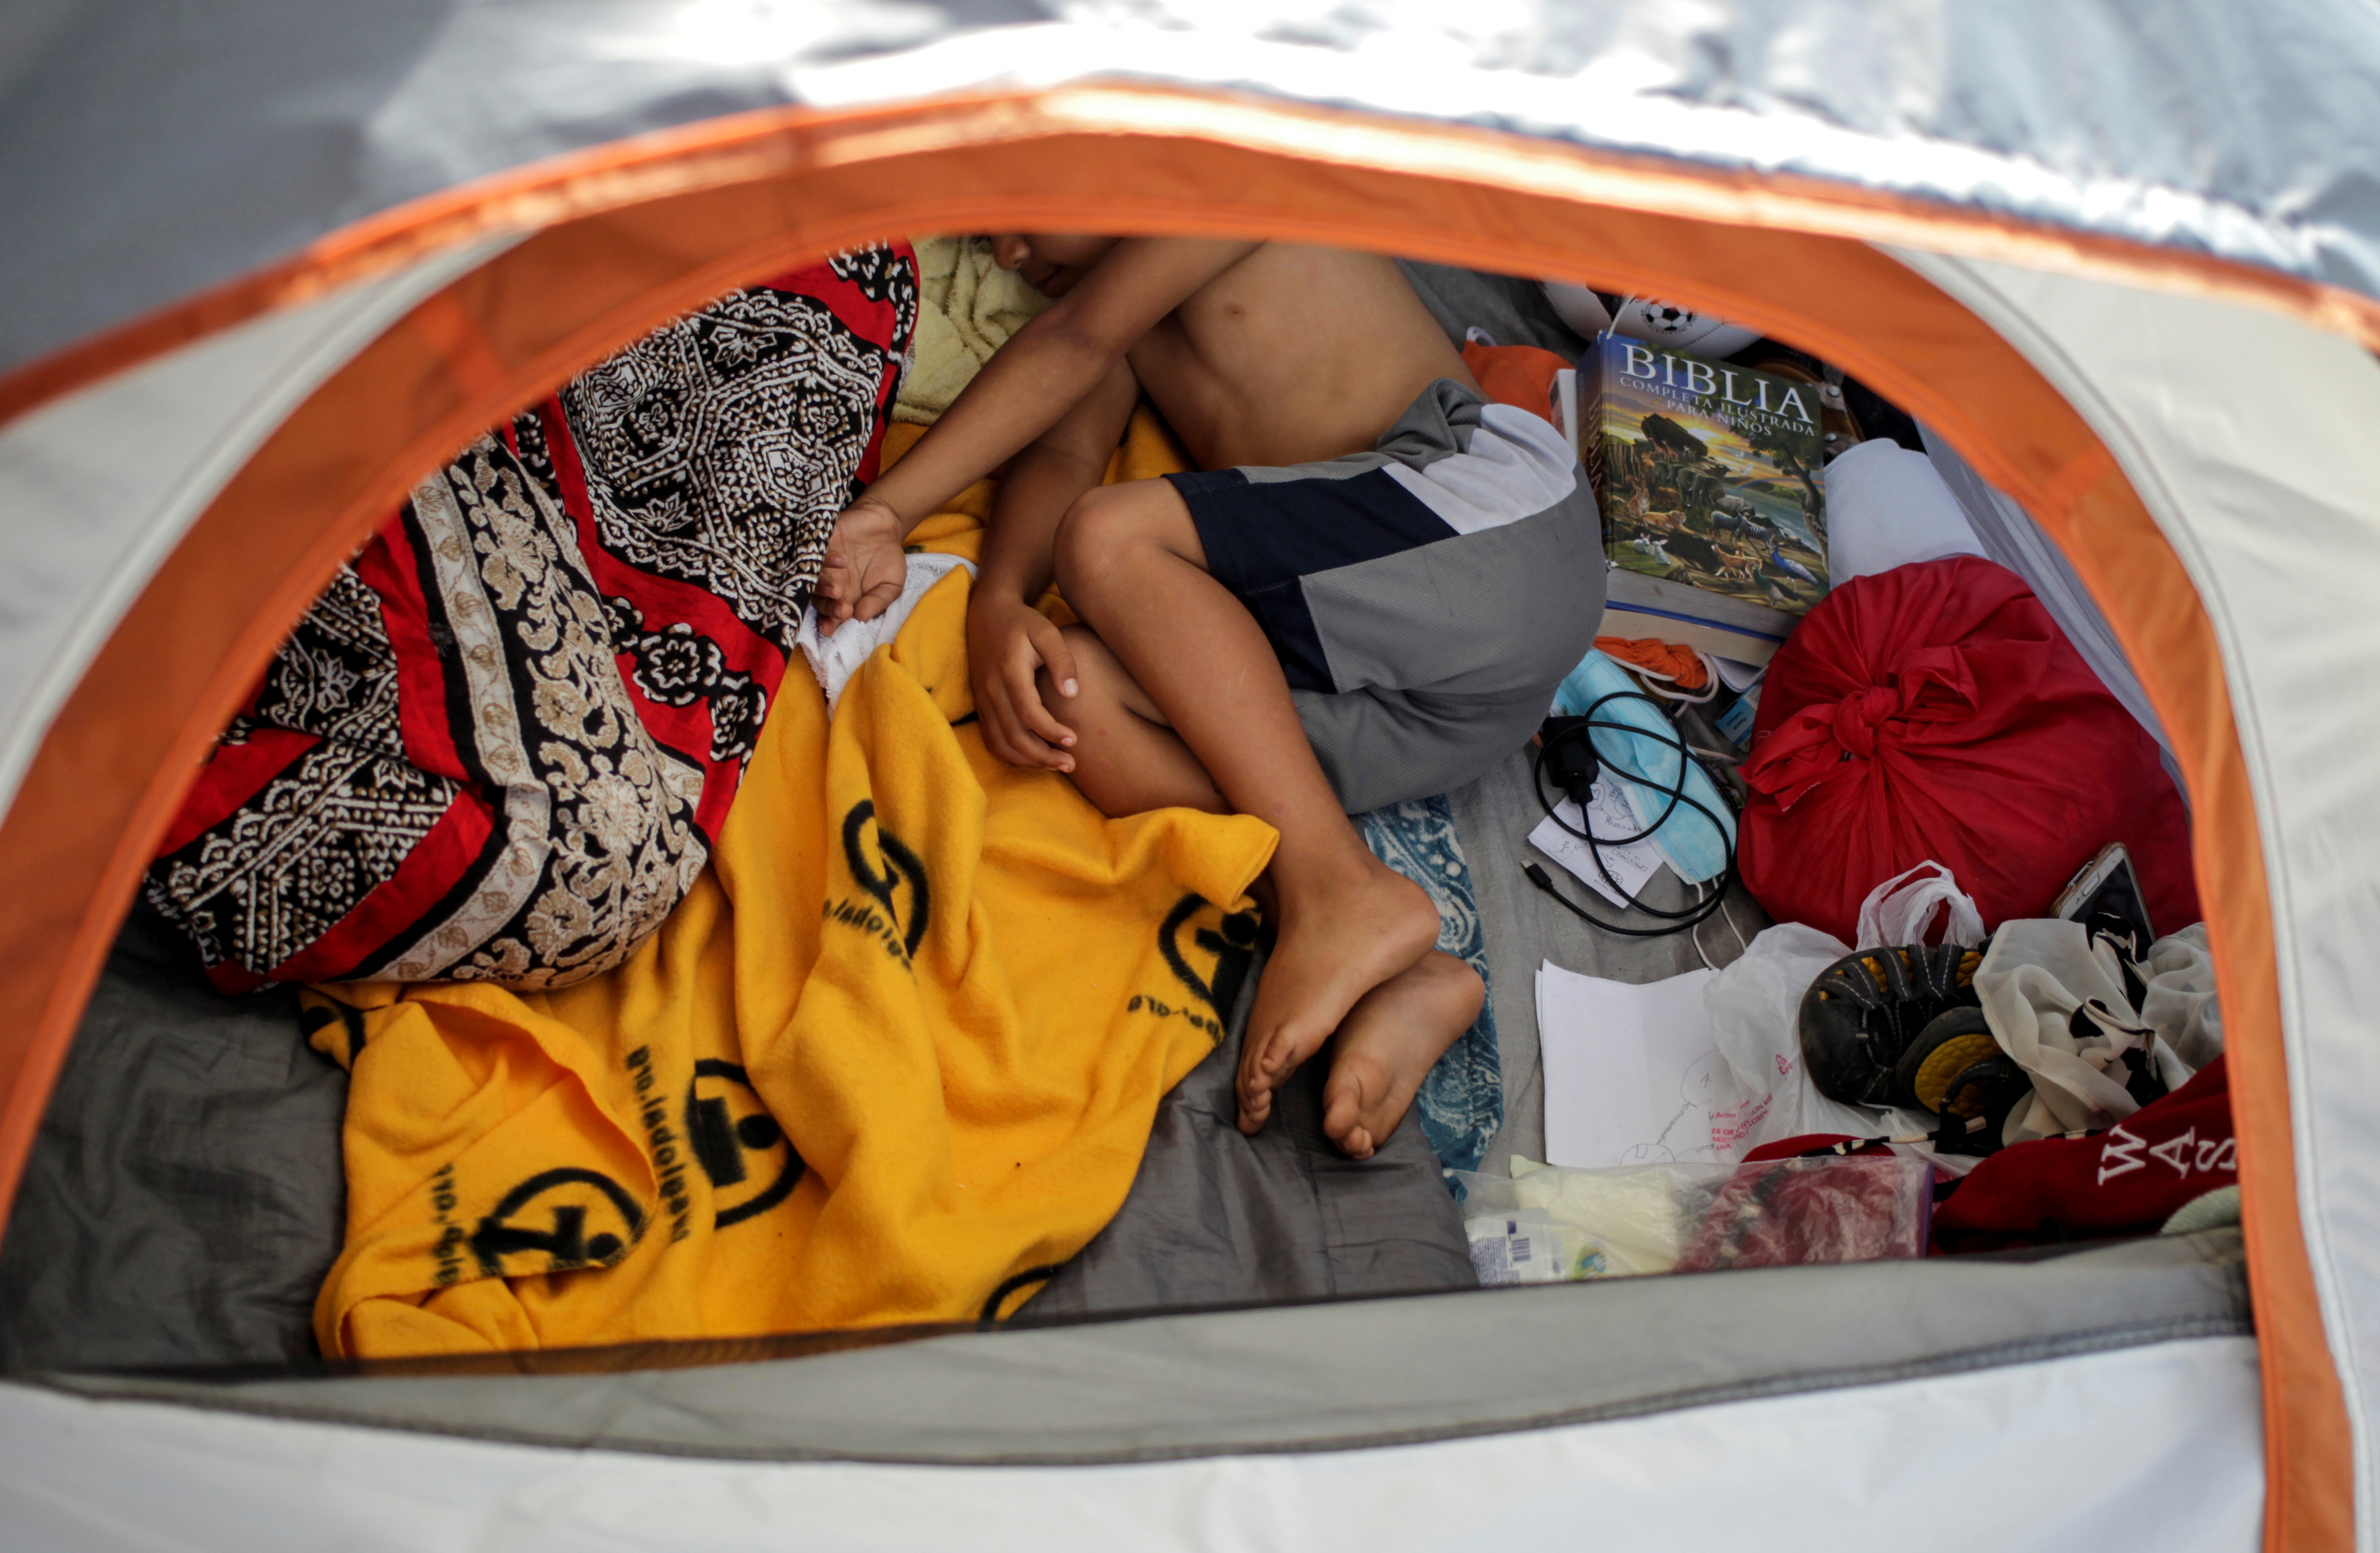 An asylum-seeking migrant youth, who was apprehended and returned to Mexico under Title 42 after crossing the border from Mexico into the U.S., rests in a public square where hundreds of migrants live in tents, in Reynosa